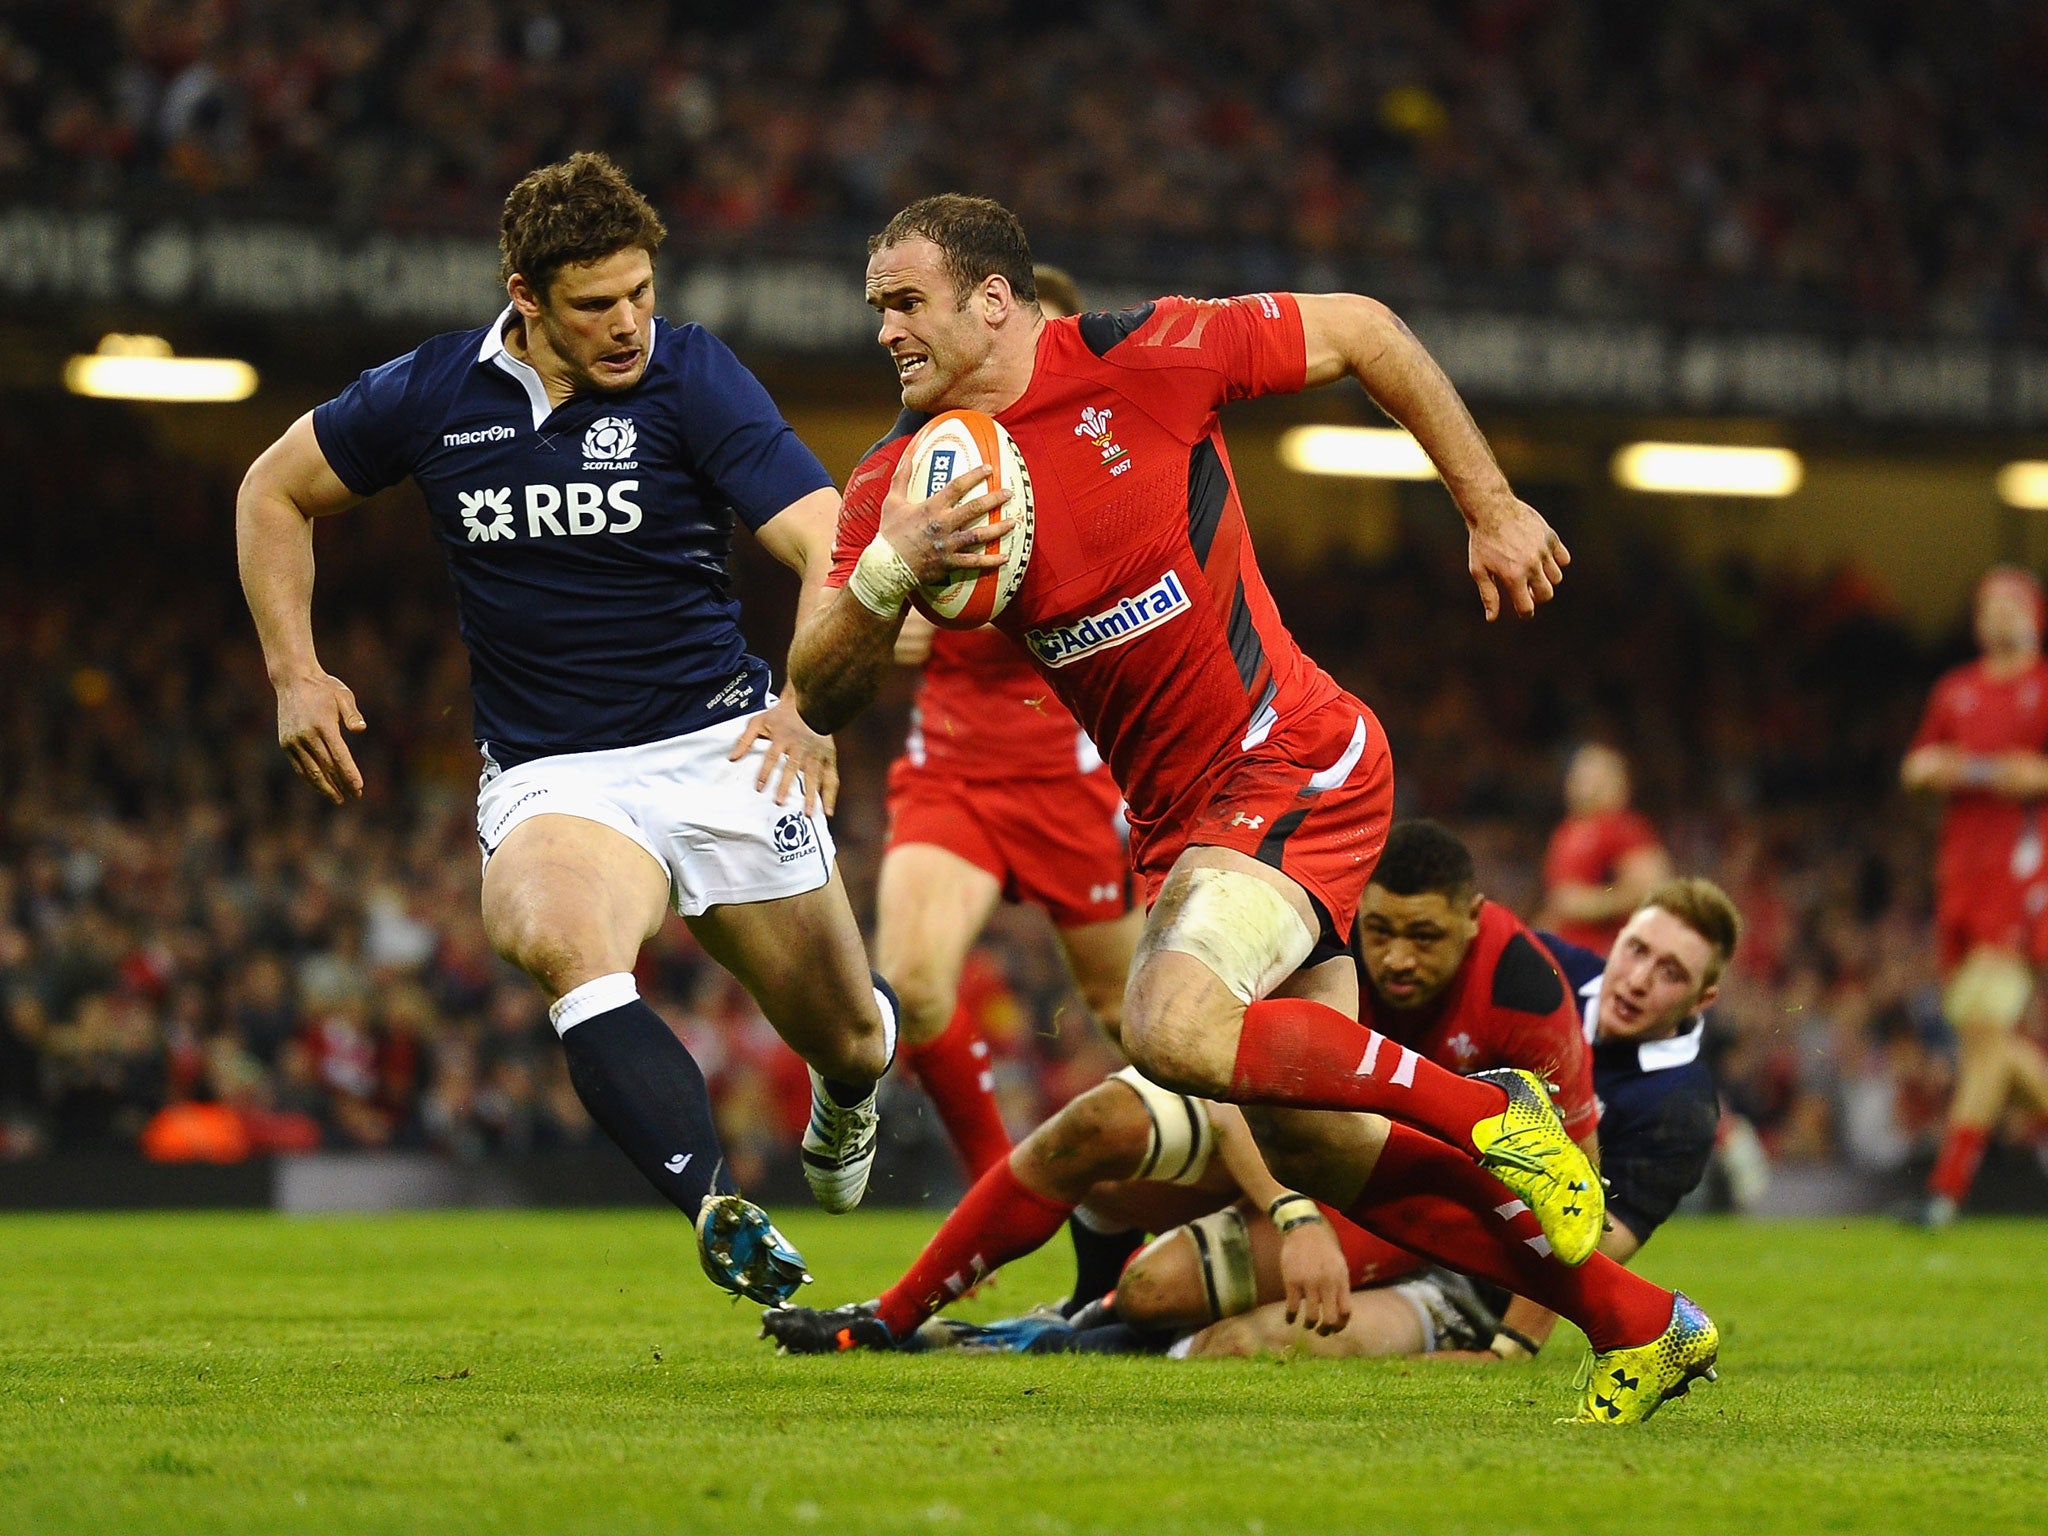 Jamie Roberts of Wales scores a try under pressure